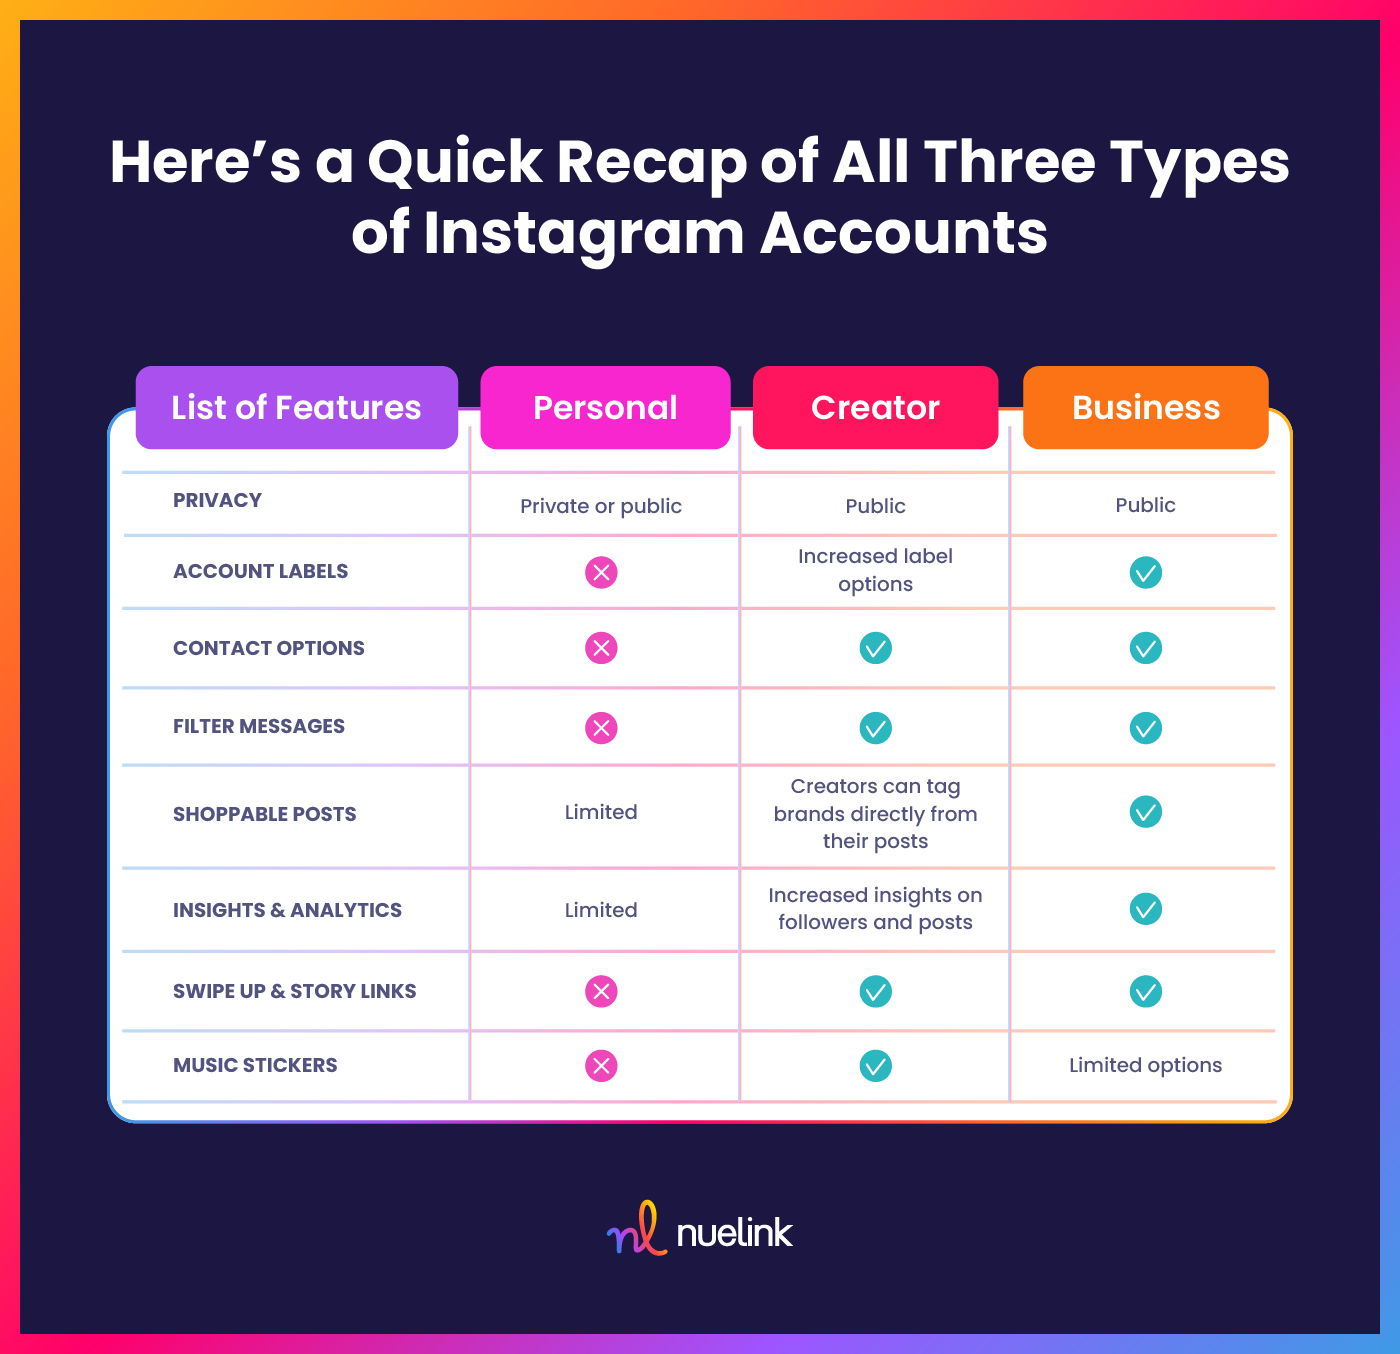 What Are the Types of Instagram Accounts?